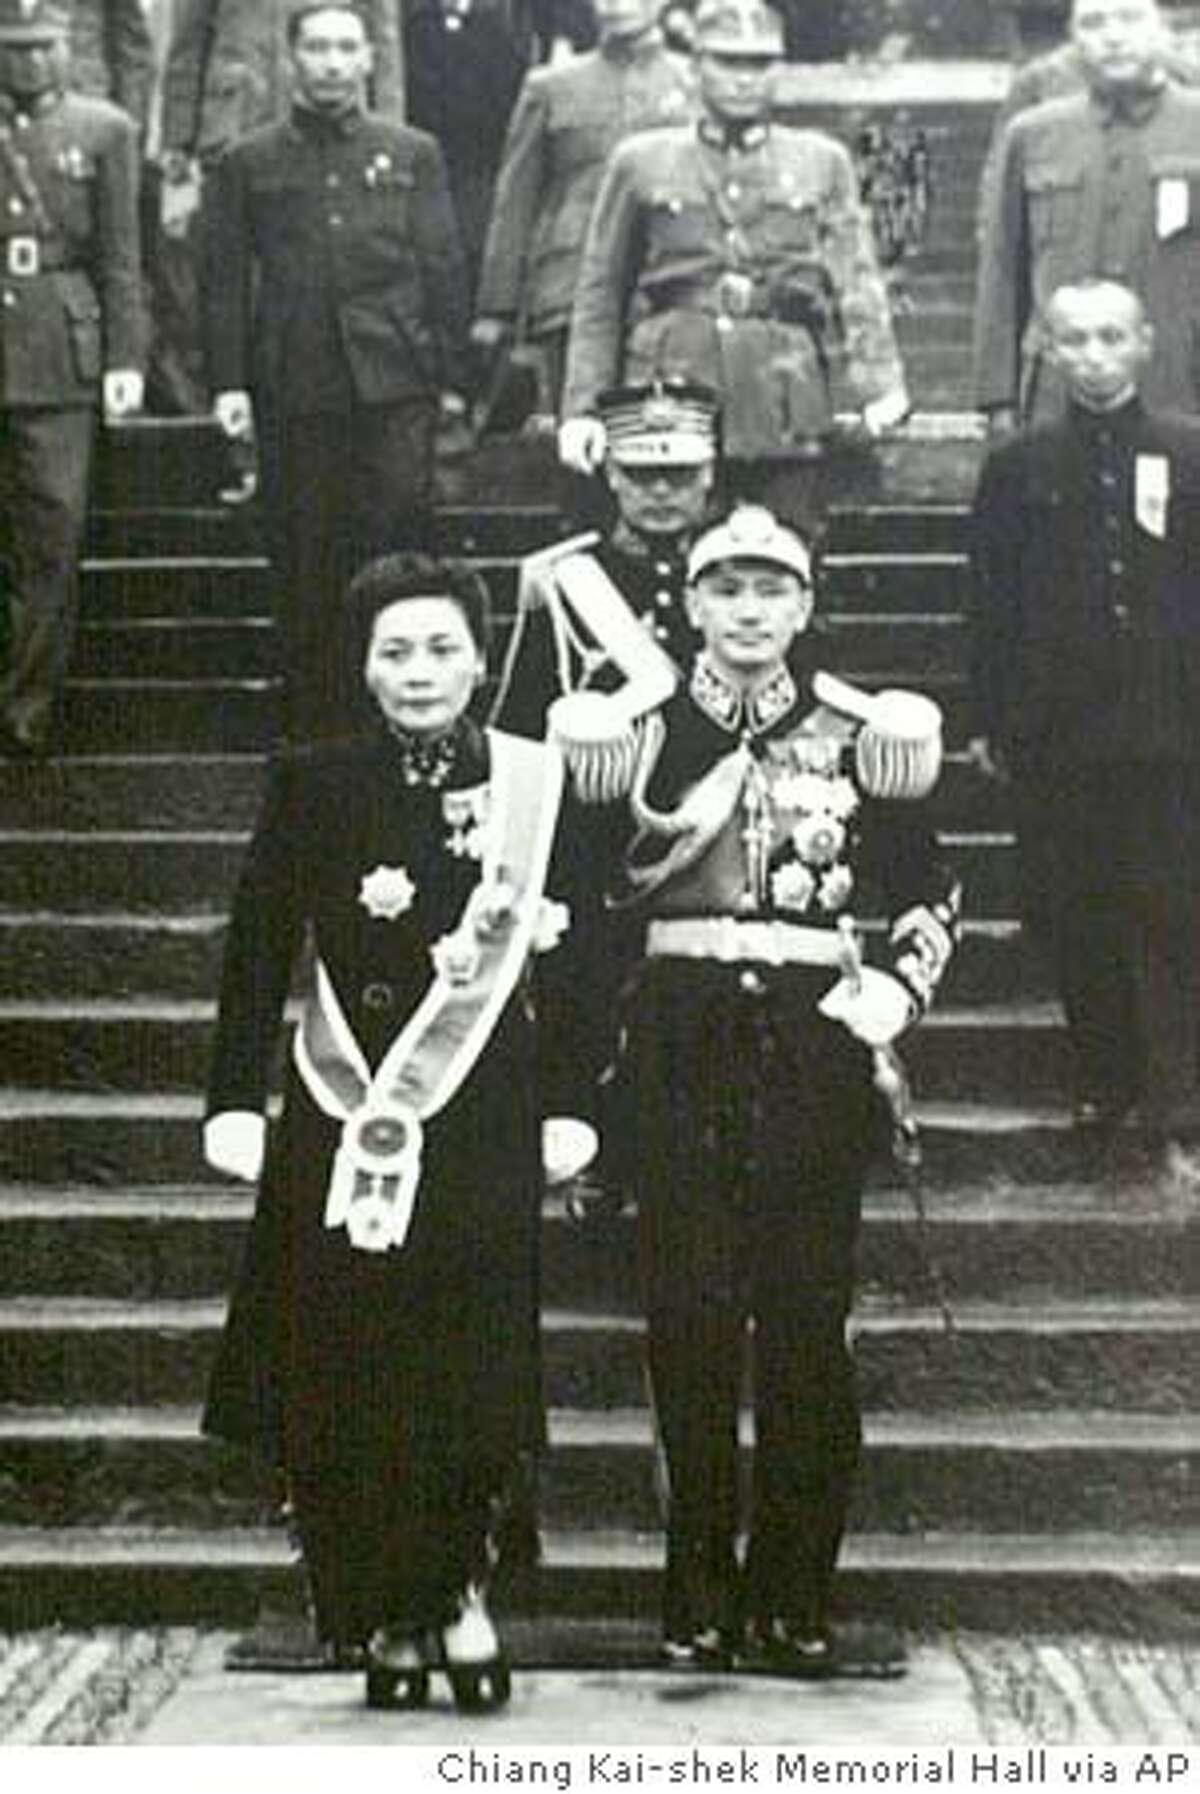 Madame Chiang Kai-shek, left, and Generalismo Chiang Kai-shek, leave an auditorium after Chiang Kai-shek assumed the post of chairman of the National Government, in this Oct. 10, 1943 photo, in China. Madame Chiang Kai-shek, famous for using her beauty, charm and fluent English to lobby Washington to help China fight the Japanese and later the Chinese Communists, died Thursday, Oct.23, 2003, in New York at age 105, Taiwan's Foreign Ministry said Friday. Details about the cause of death were not immediately available, the ministry spokesman Richard Shih said.(AP Photo Chiang Kai-shek Memorial Hall, HO) PHOTO TAKEN IN JULY 1943 A news rack outside a Stockton Street store displays a World Journal front-page story on the death of Madame Chiang Kai-shek. A news rack outside a Stockton Street store displays a World Journal front-page story on the death of Madame Chiang Kai-shek. CAT Metro#Metro#Chronicle#10/25/2003#ALL#5star##0421454137